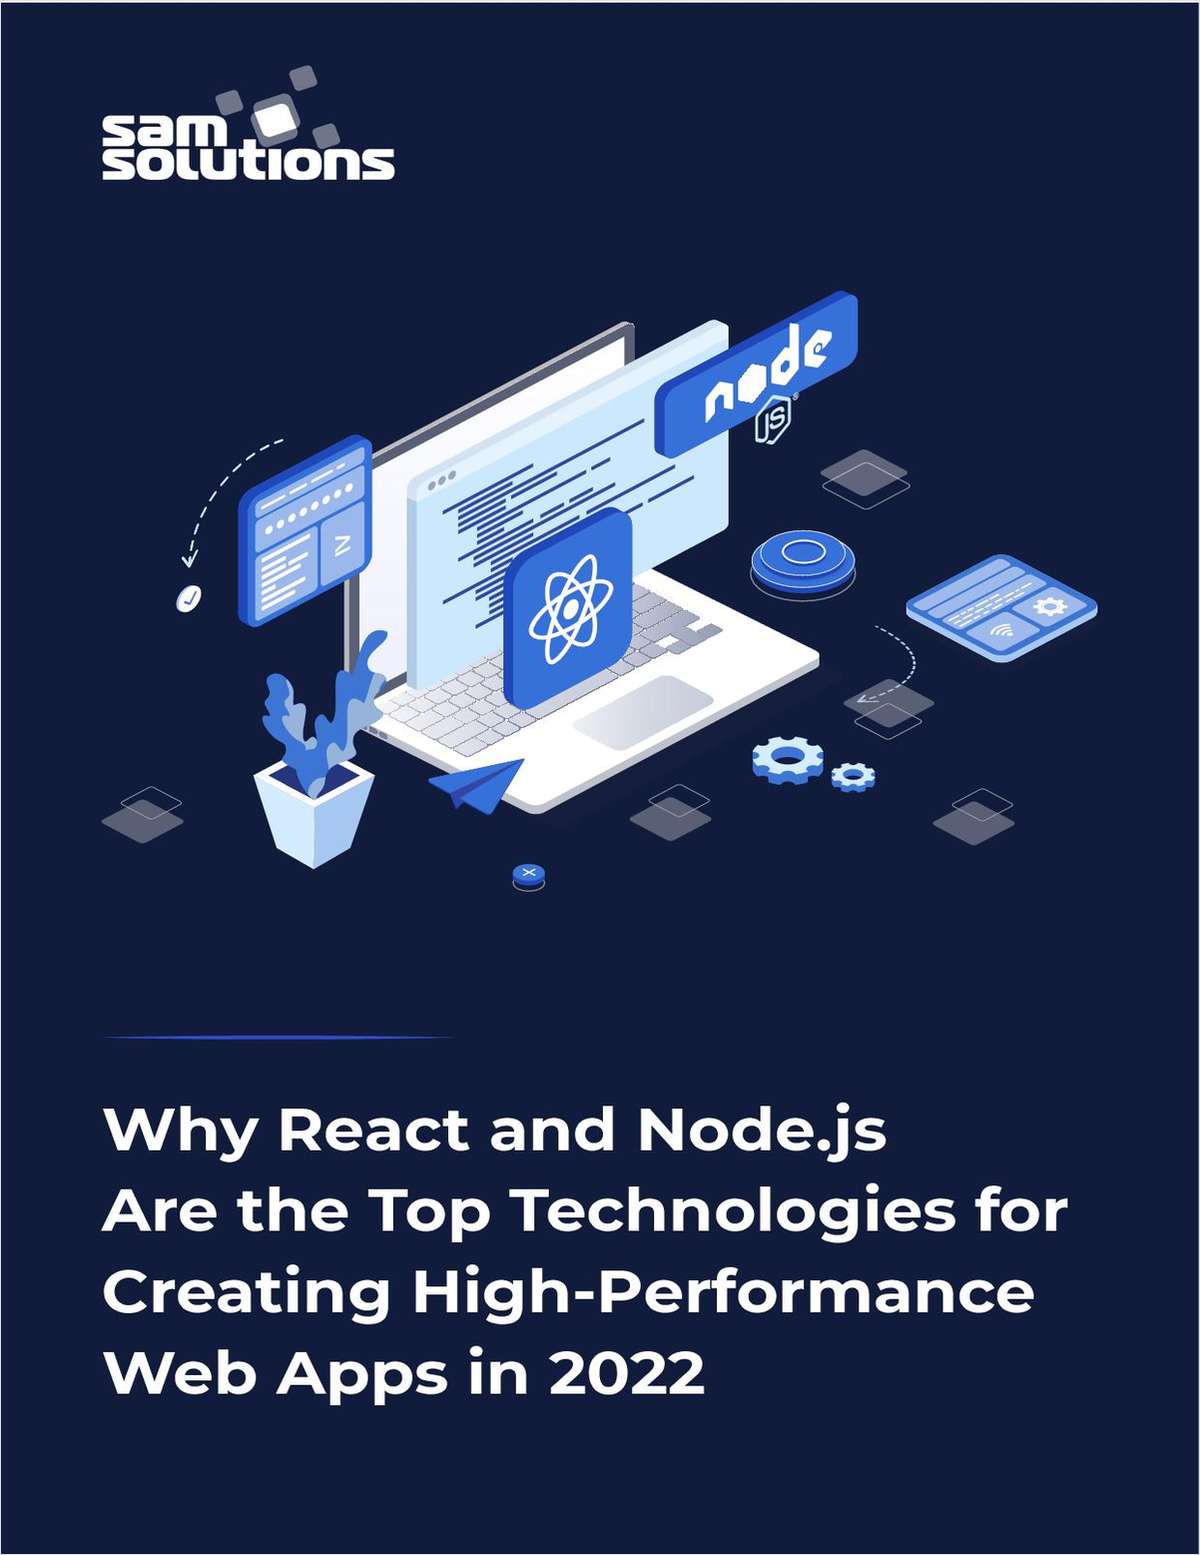 Why React and Node.js Are the Top Technologies for Creating High-Performance Web Apps in 2022: Go to Market Quicker and Create Fast, Ultra-Scalable Web and Mobile Applications